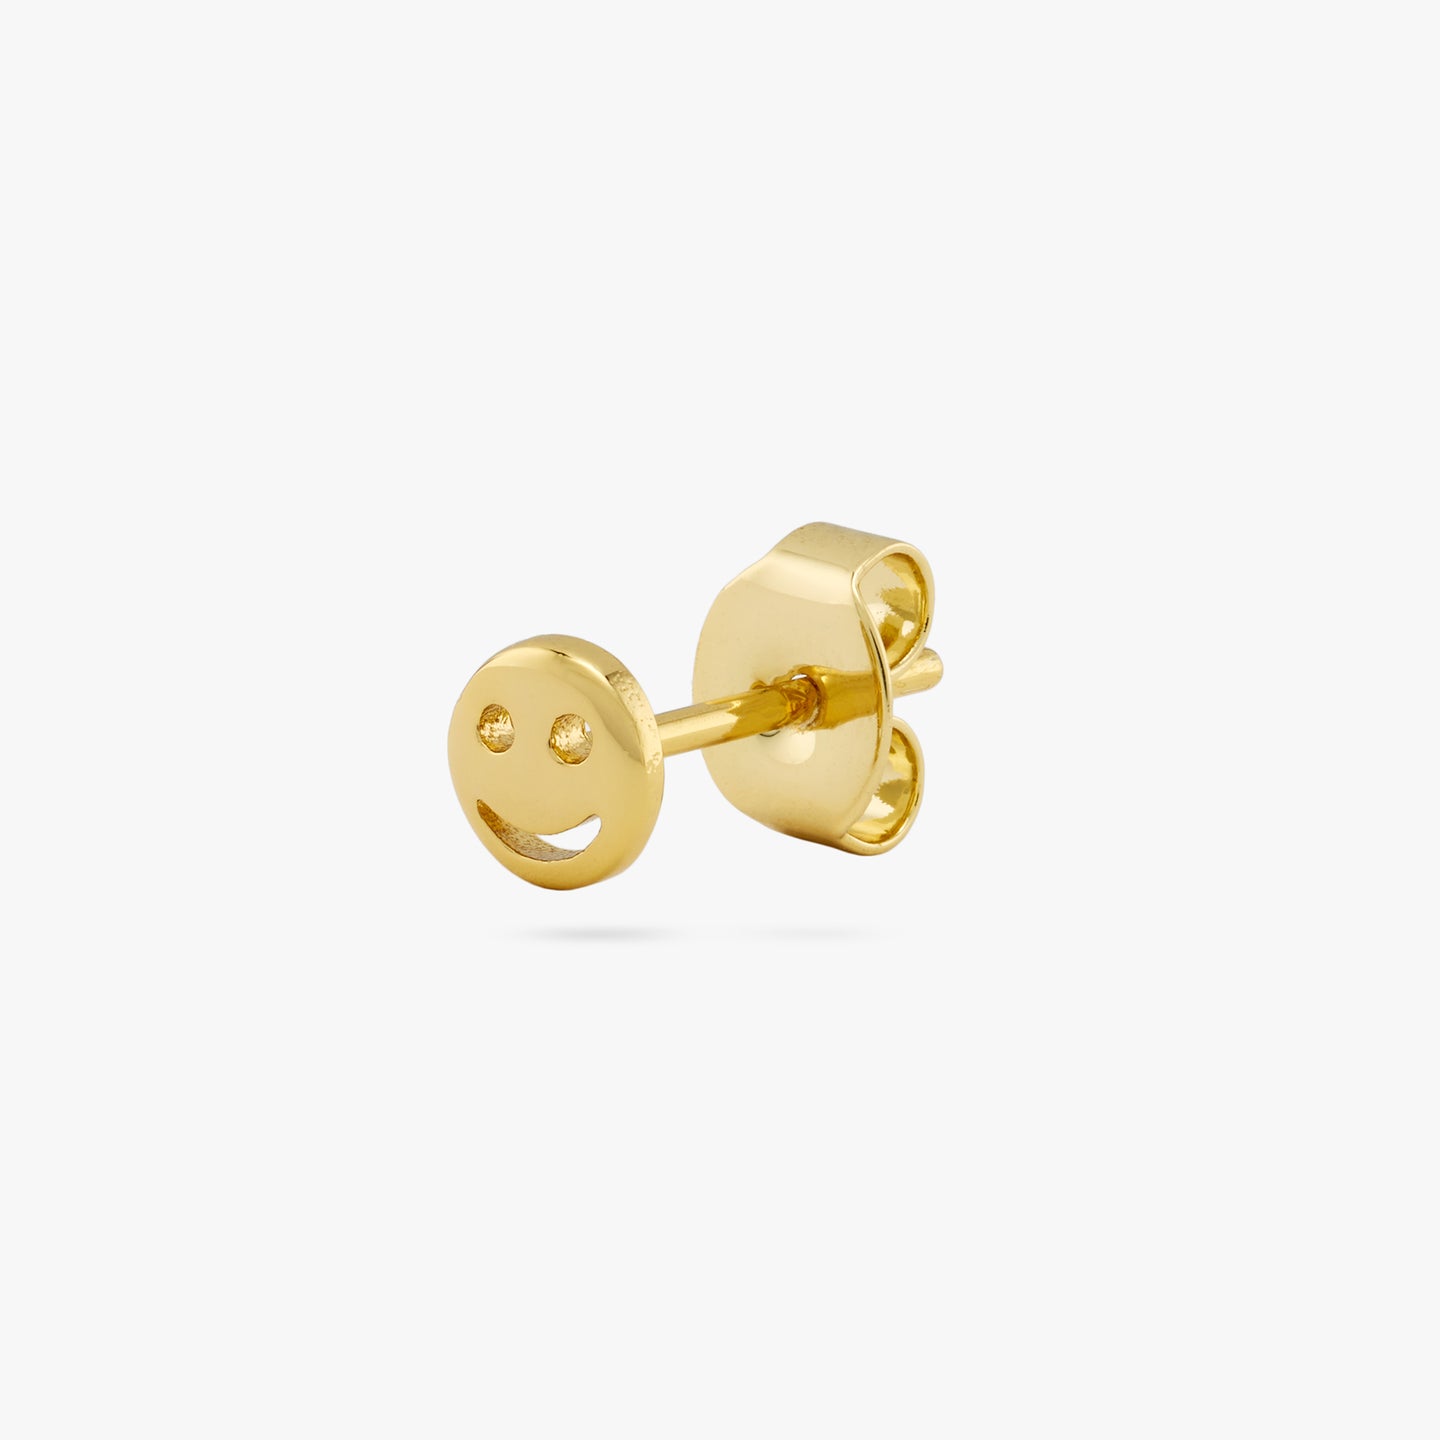 This is a small gold smiley face stud color:null|gold